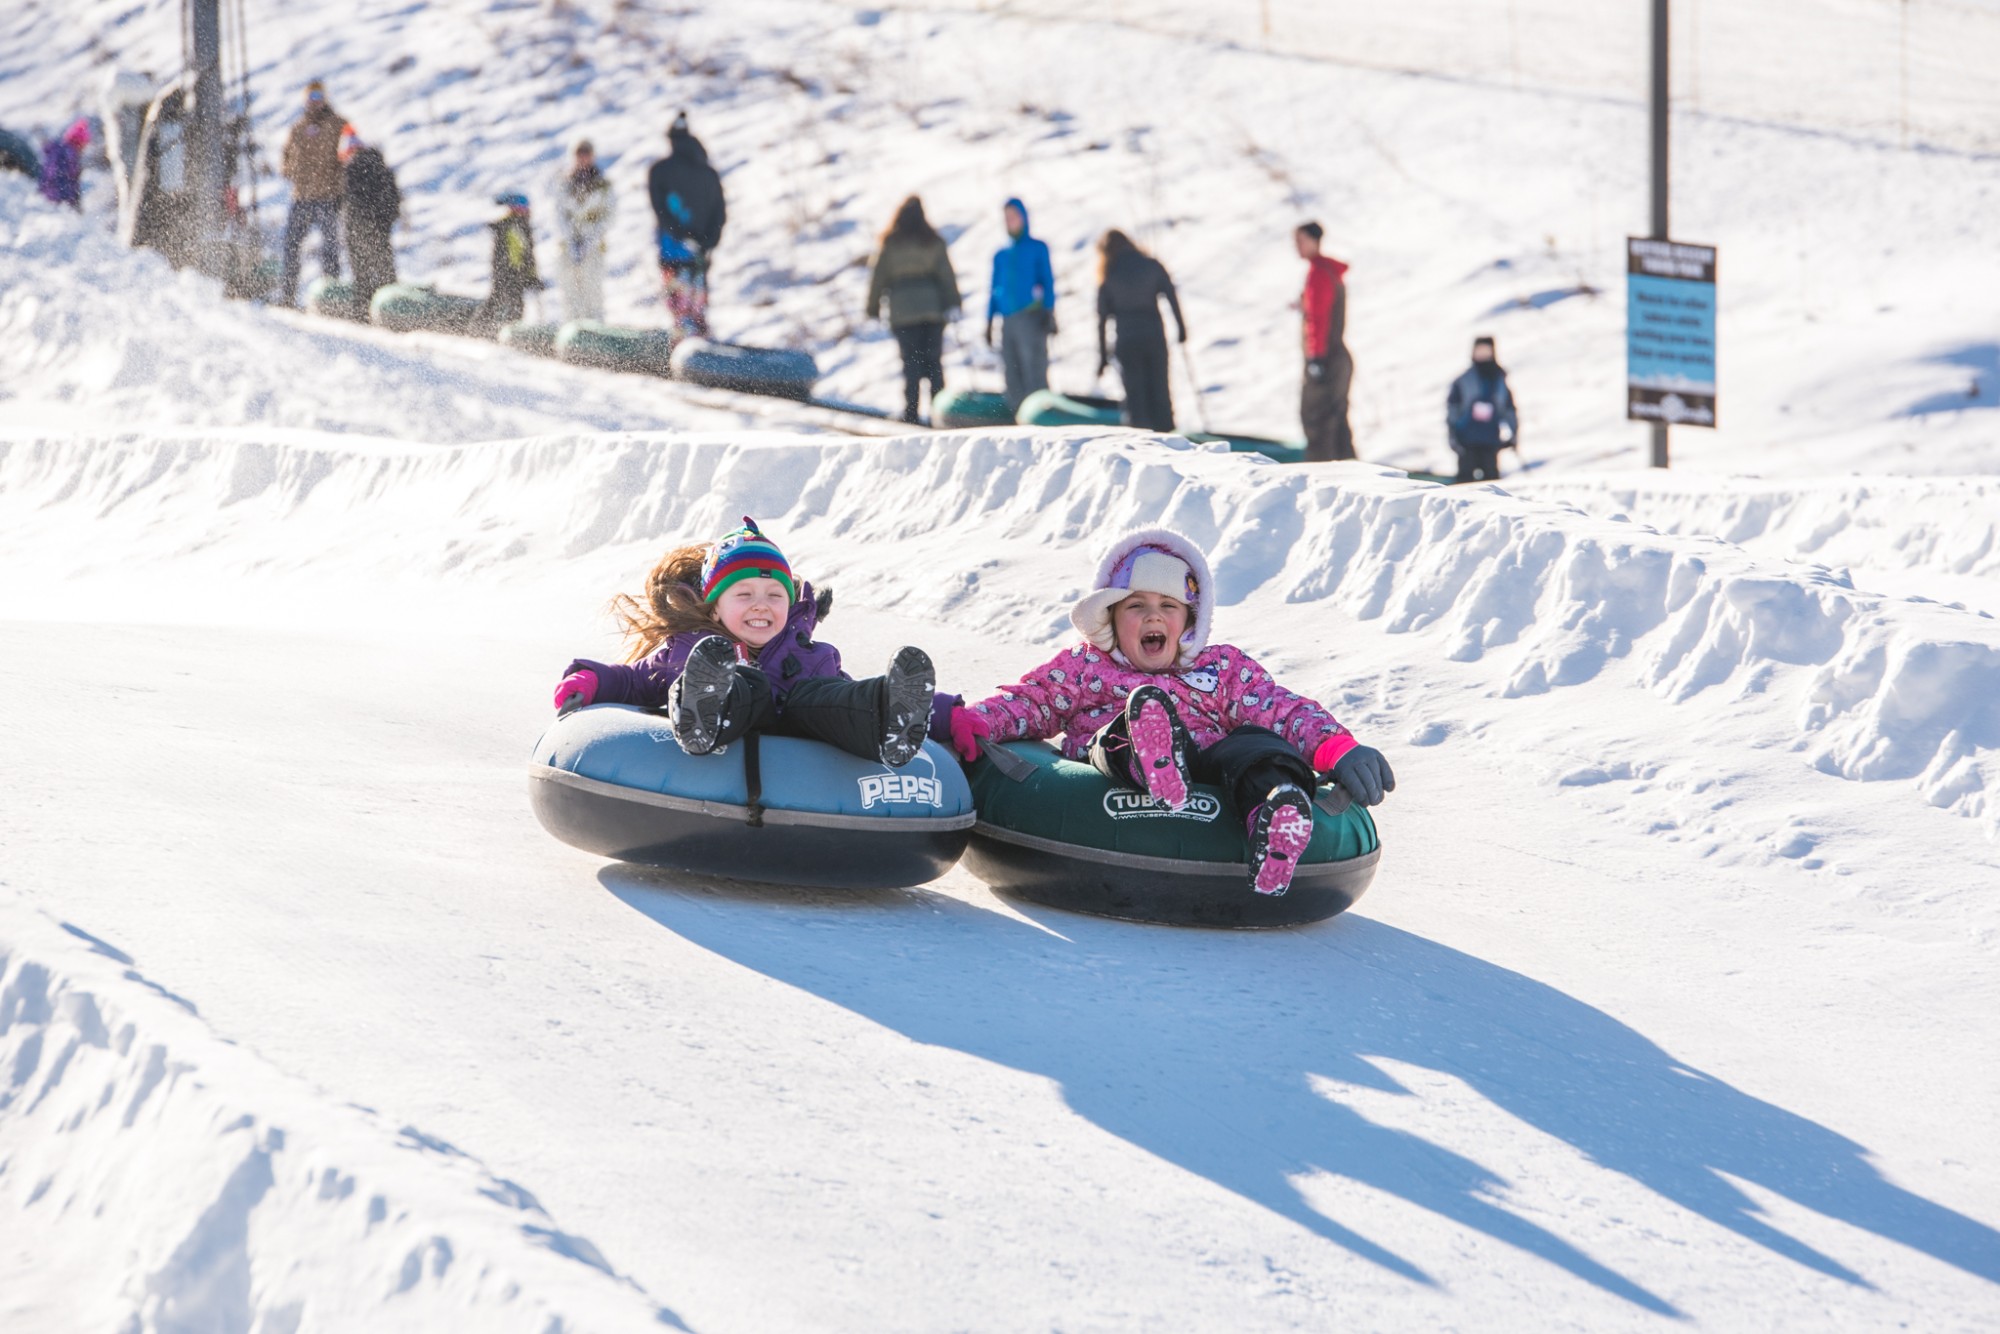 All smiles at Snow Trails Vertical Descent Tubing Park